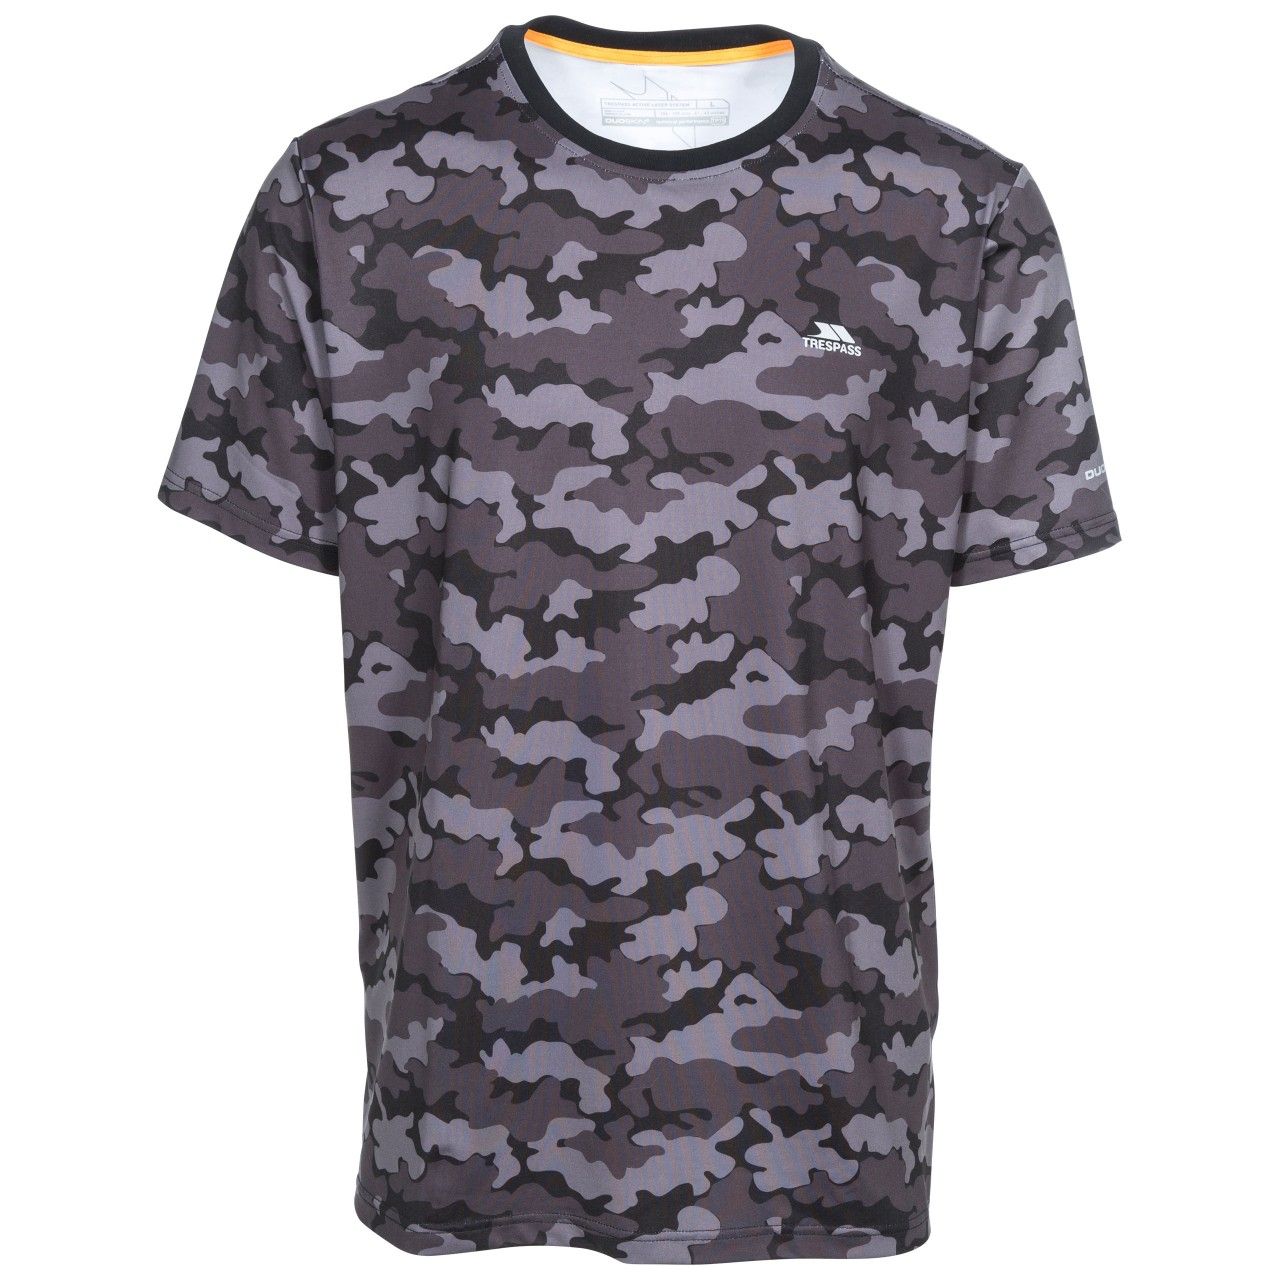 All over print. Short sleeve. Round neck. Reflective logos. Wicking. Quick dry. 90% Polyester, 10% Elastane. Trespass Mens Chest Sizing (approx): S - 35-37in/89-94cm, M - 38-40in/96.5-101.5cm, L - 41-43in/104-109cm, XL - 44-46in/111.5-117cm, XXL - 46-48in/117-122cm, 3XL - 48-50in/122-127cm.